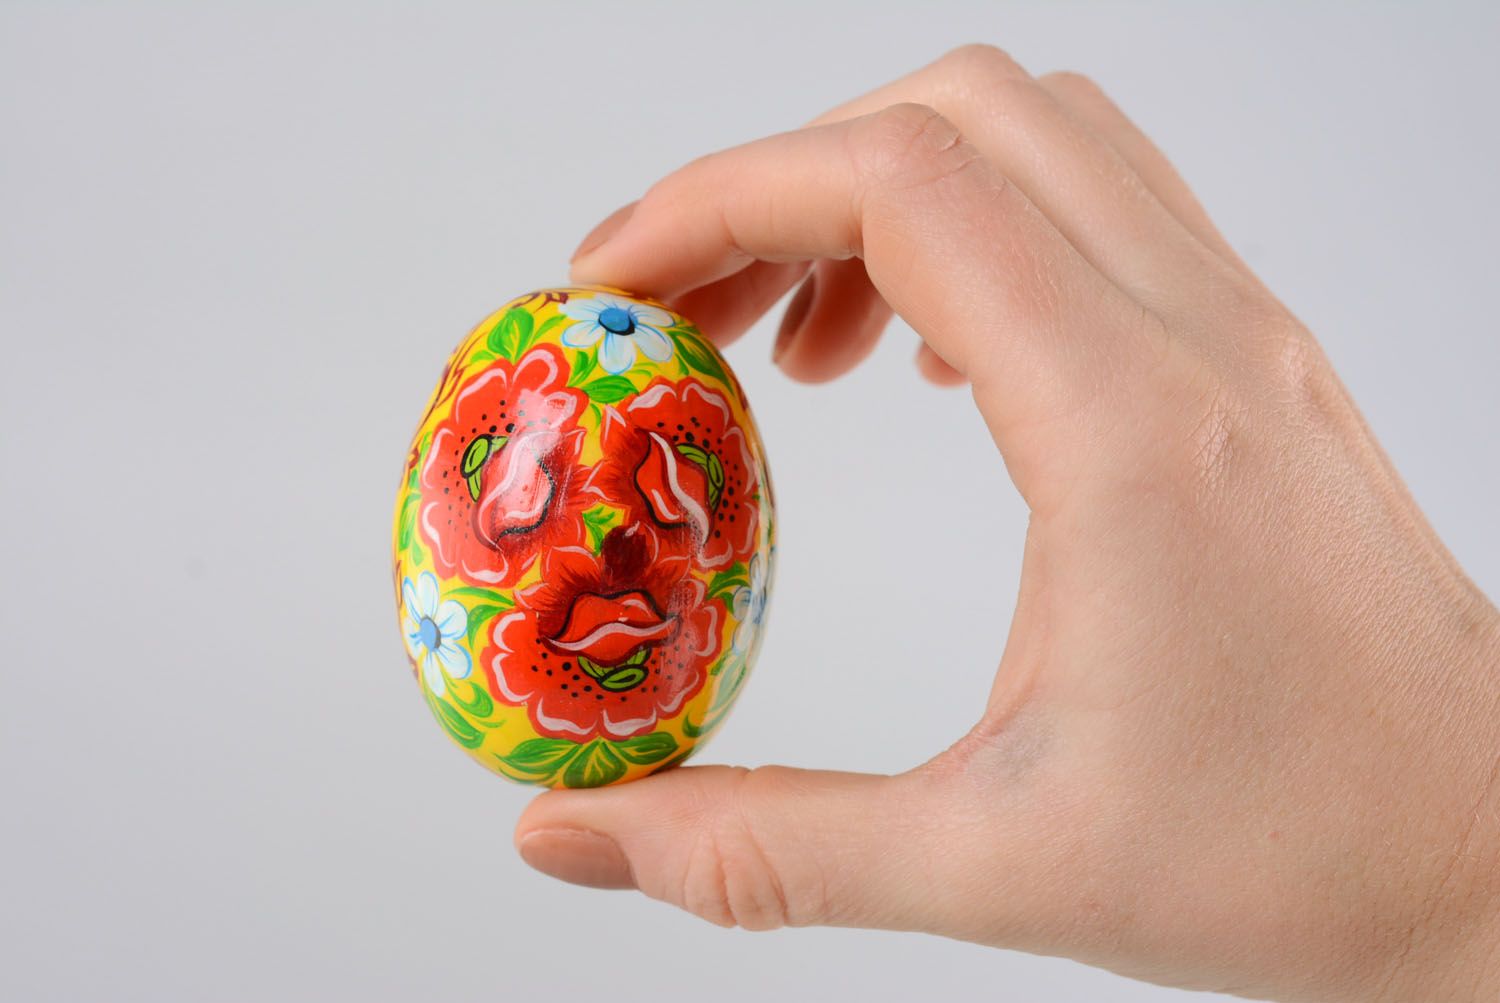 Wooden painted egg photo 4